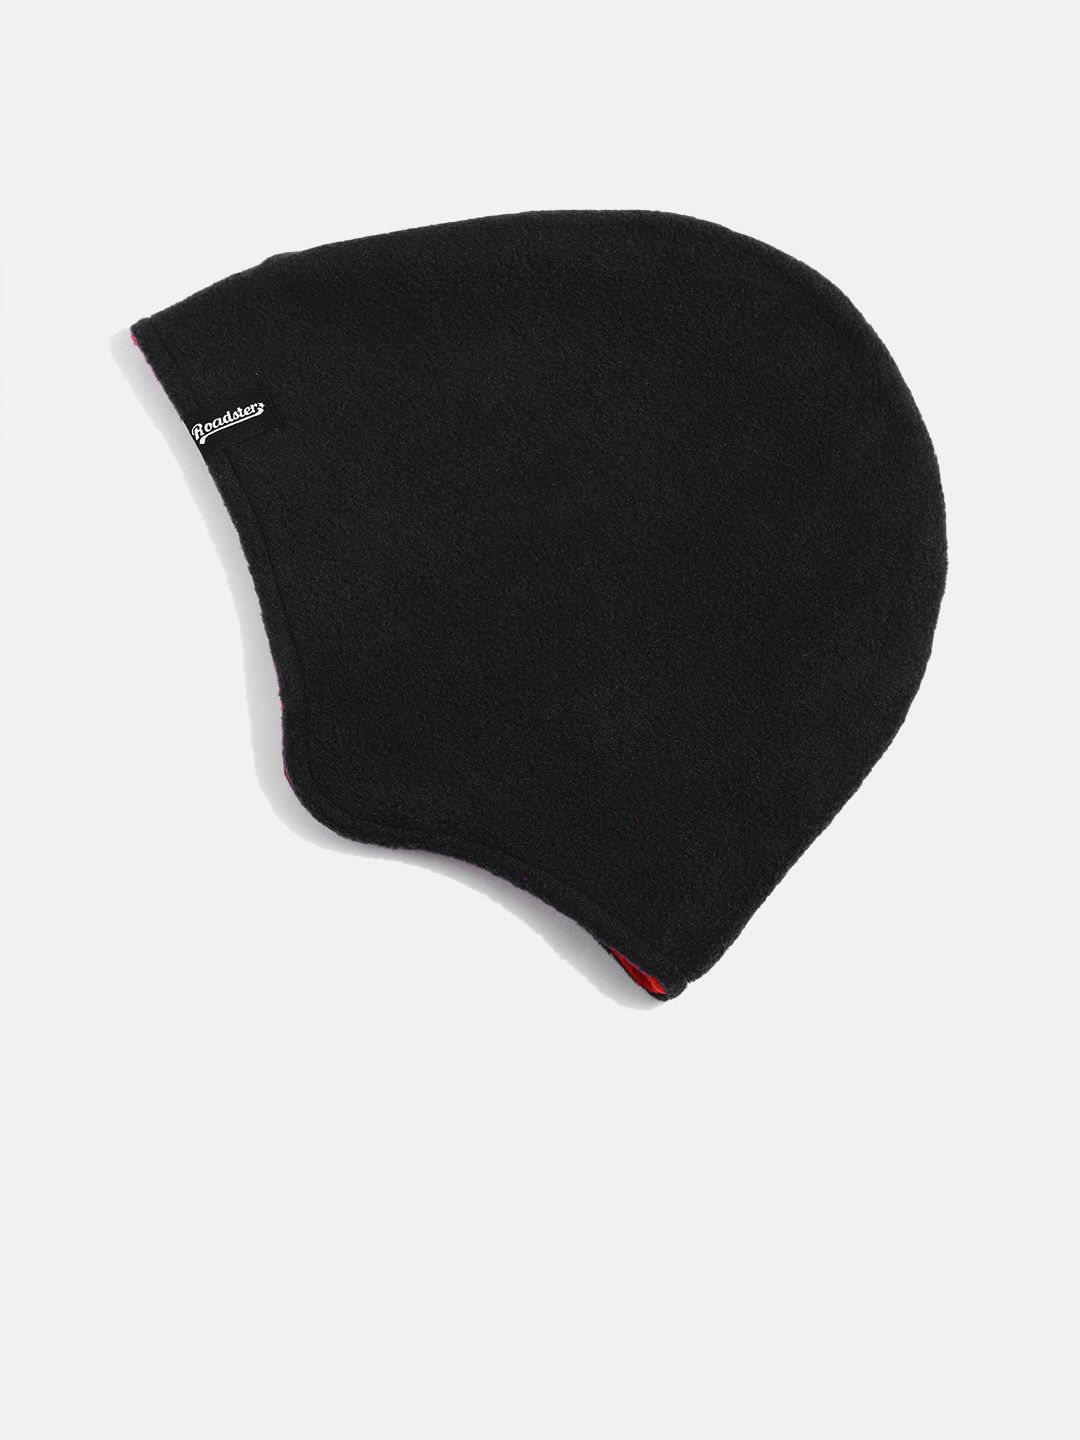 Roadster Unisex Black Solid Beanie Price in India